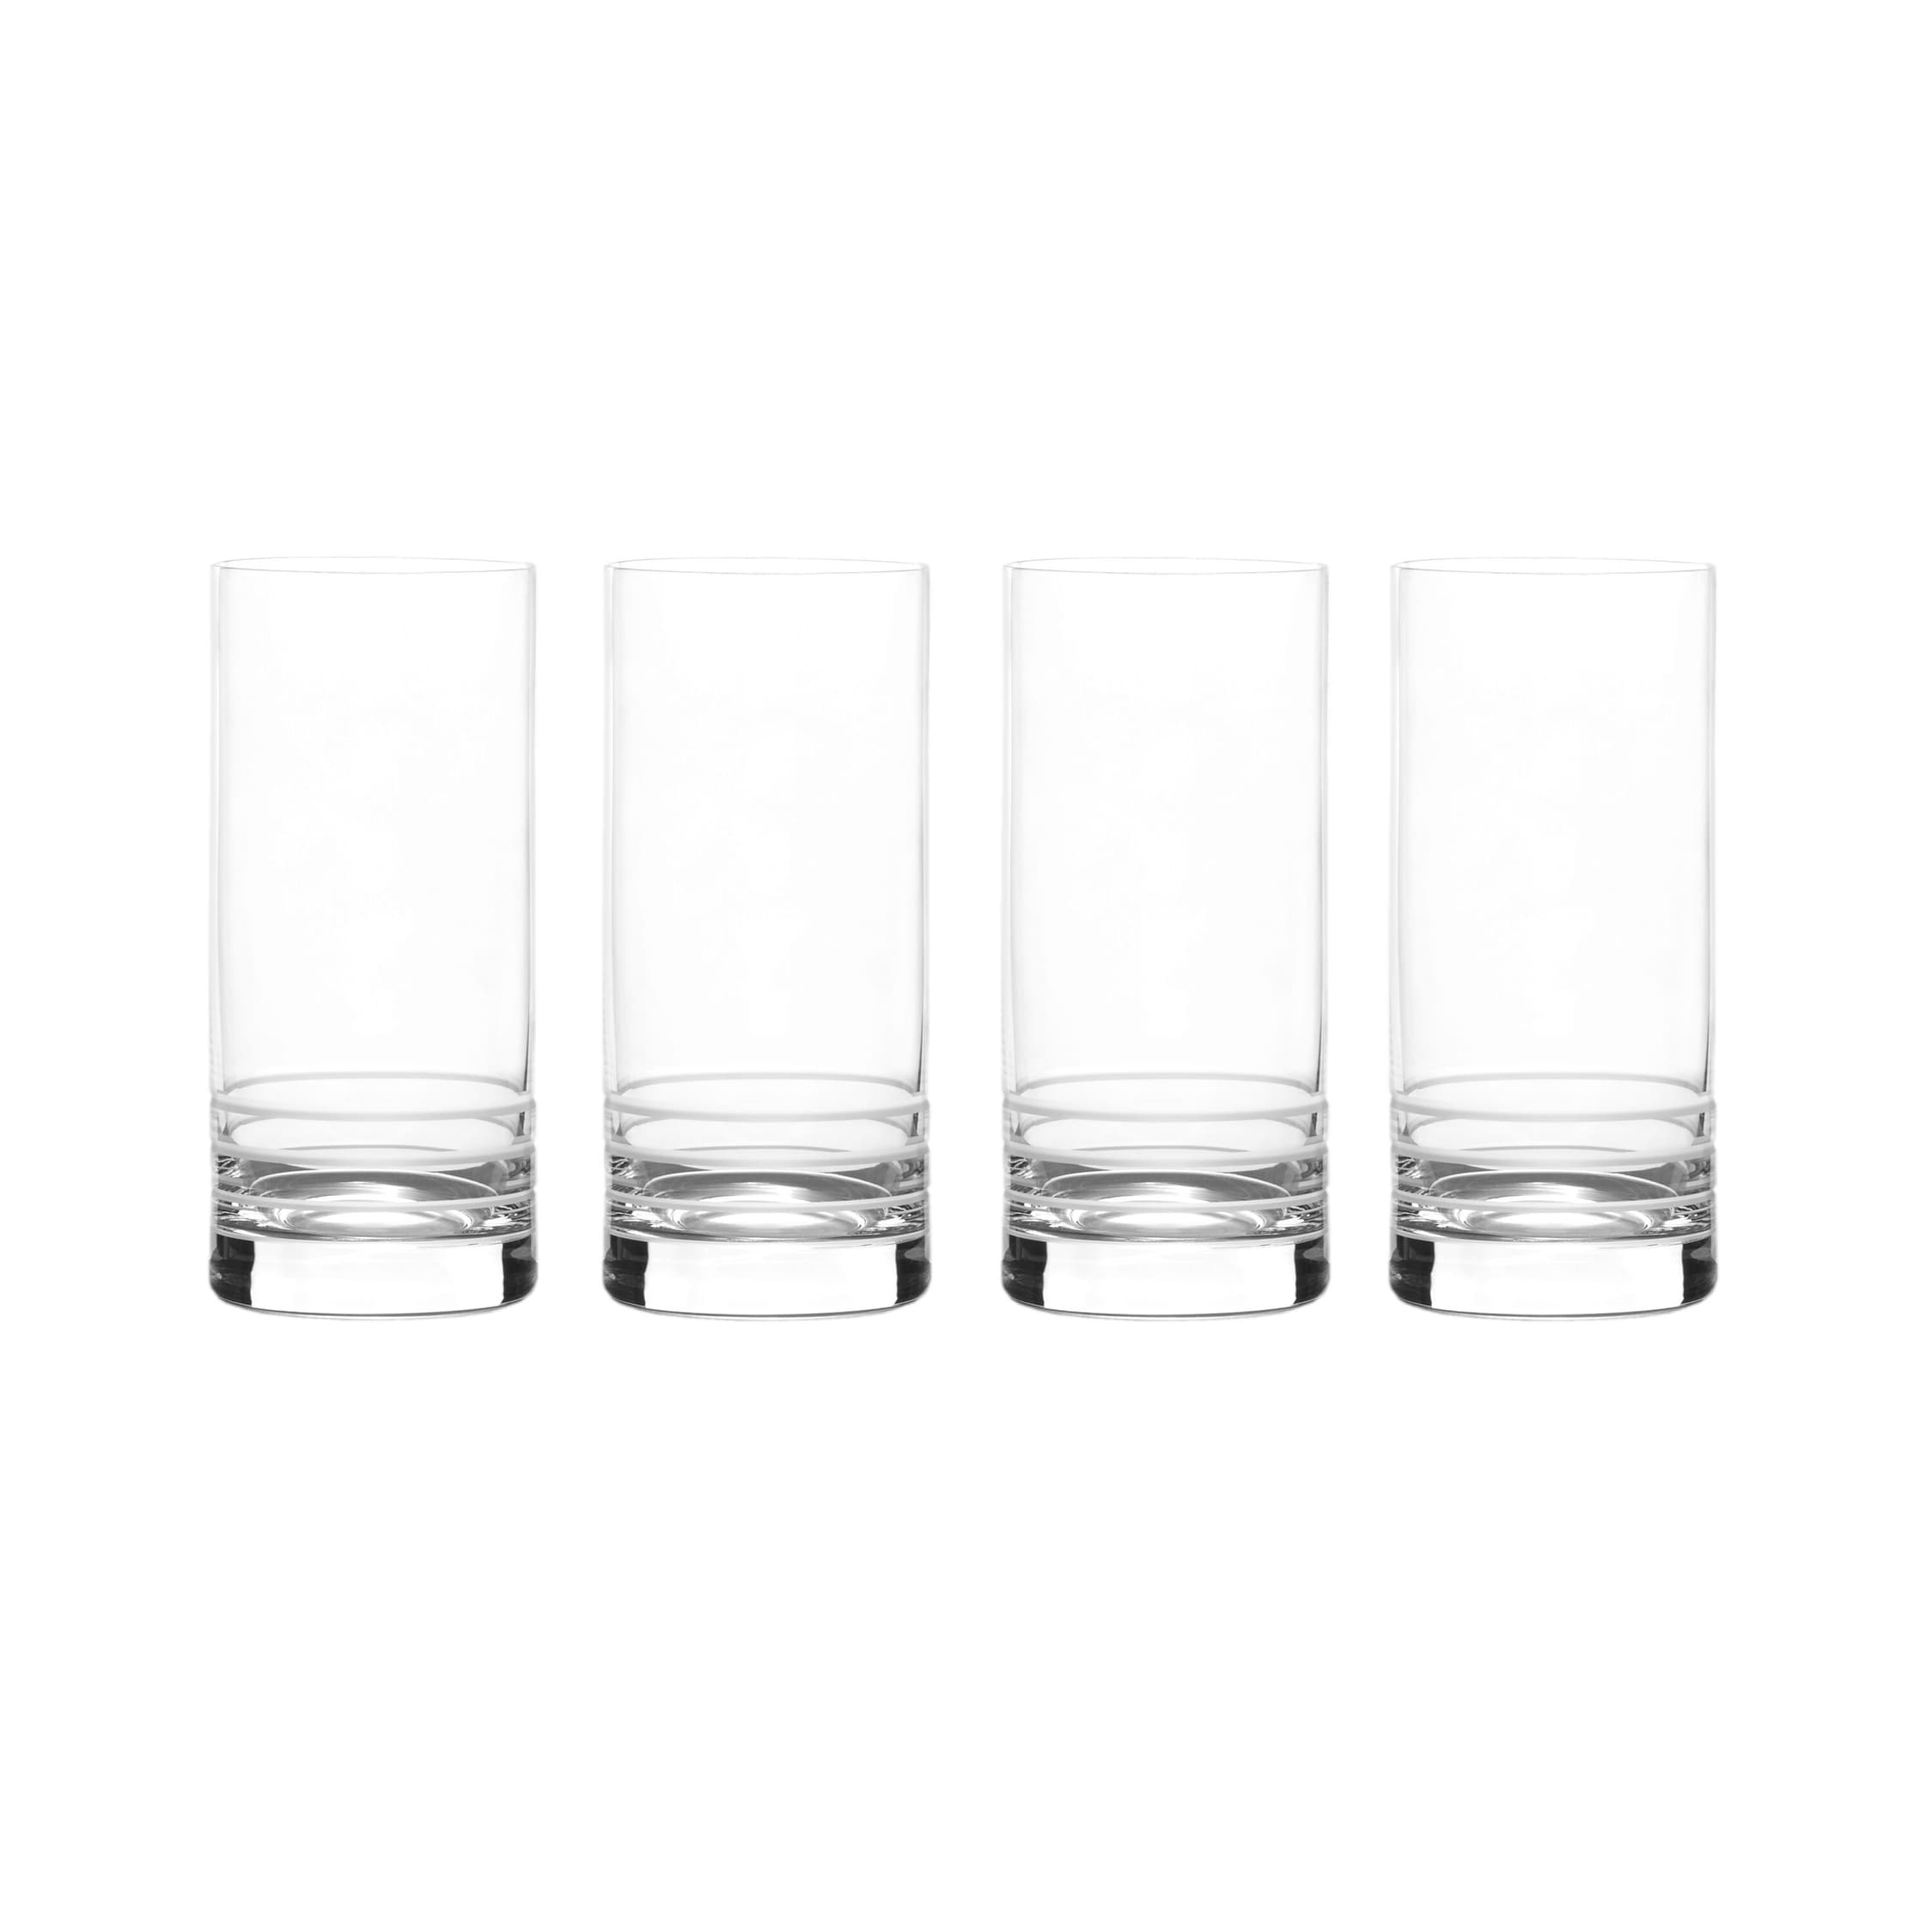 Glassware Drinking Glasses Set Of 8 by Home Essentials & Beyond 4 Highball  (17 oz.) Kitchen Glasses | 4 (13 oz.) Rocks Glass Cups for Water, Juice and